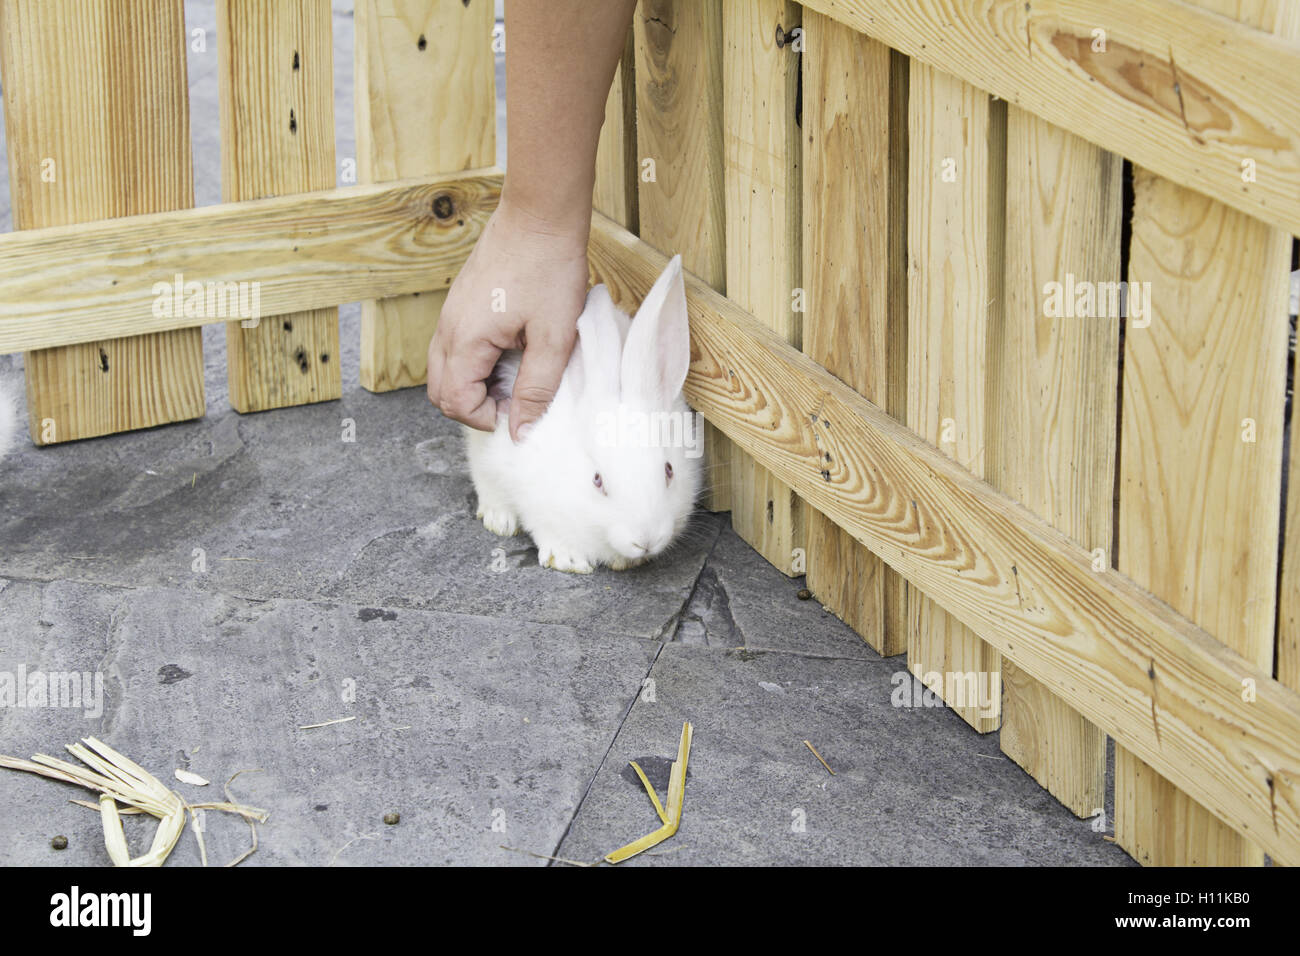 White Rabbit farm caressed by a person, animal Stock Photo